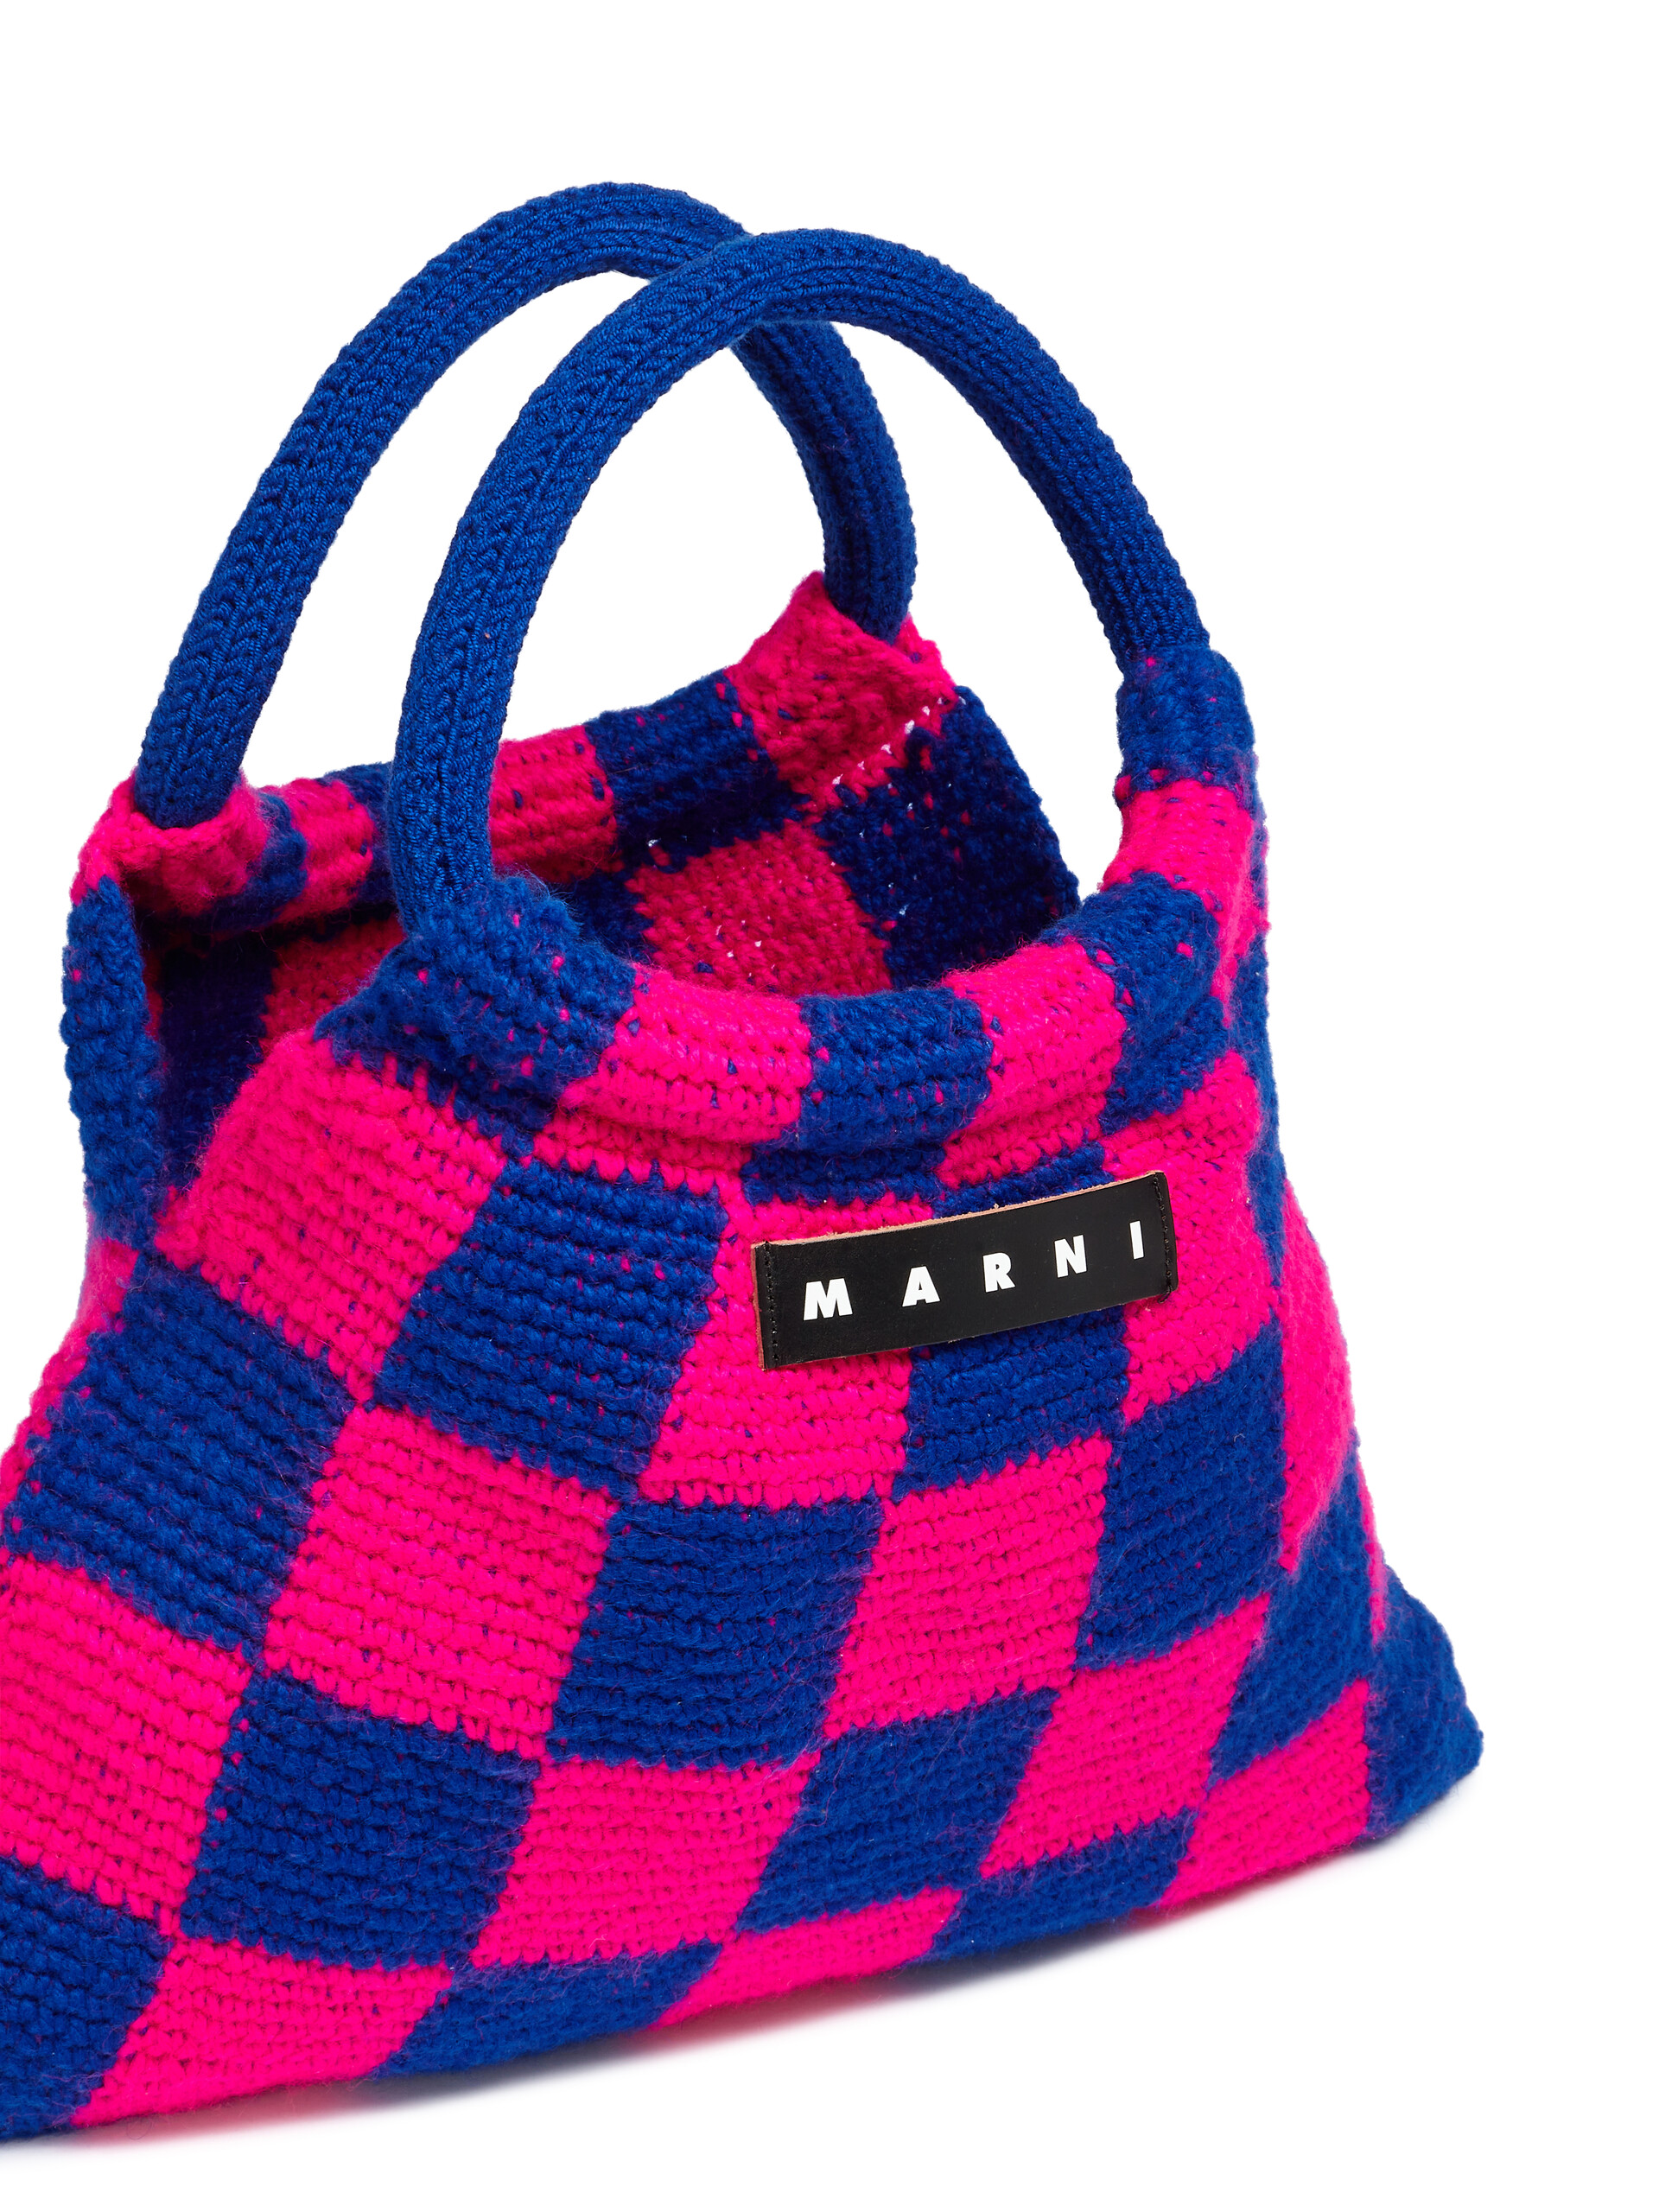 MARNI MARKET bag in pink and blue crochet - Bags - Image 4